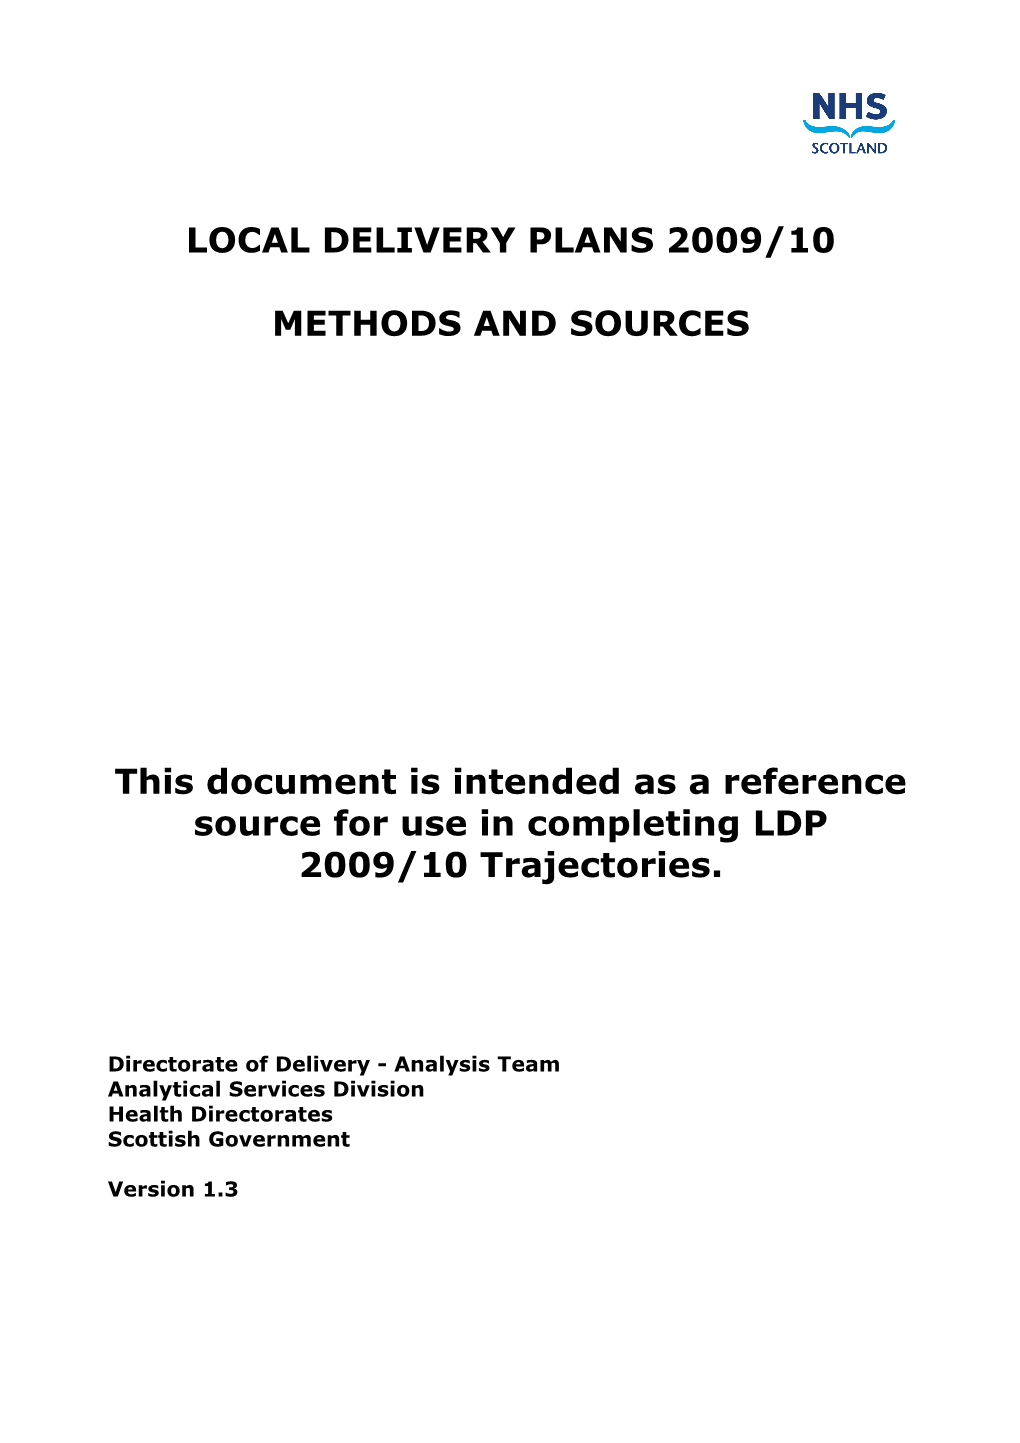 Local Delivery Plan 2009 2010 Methods and Sources Feb 09